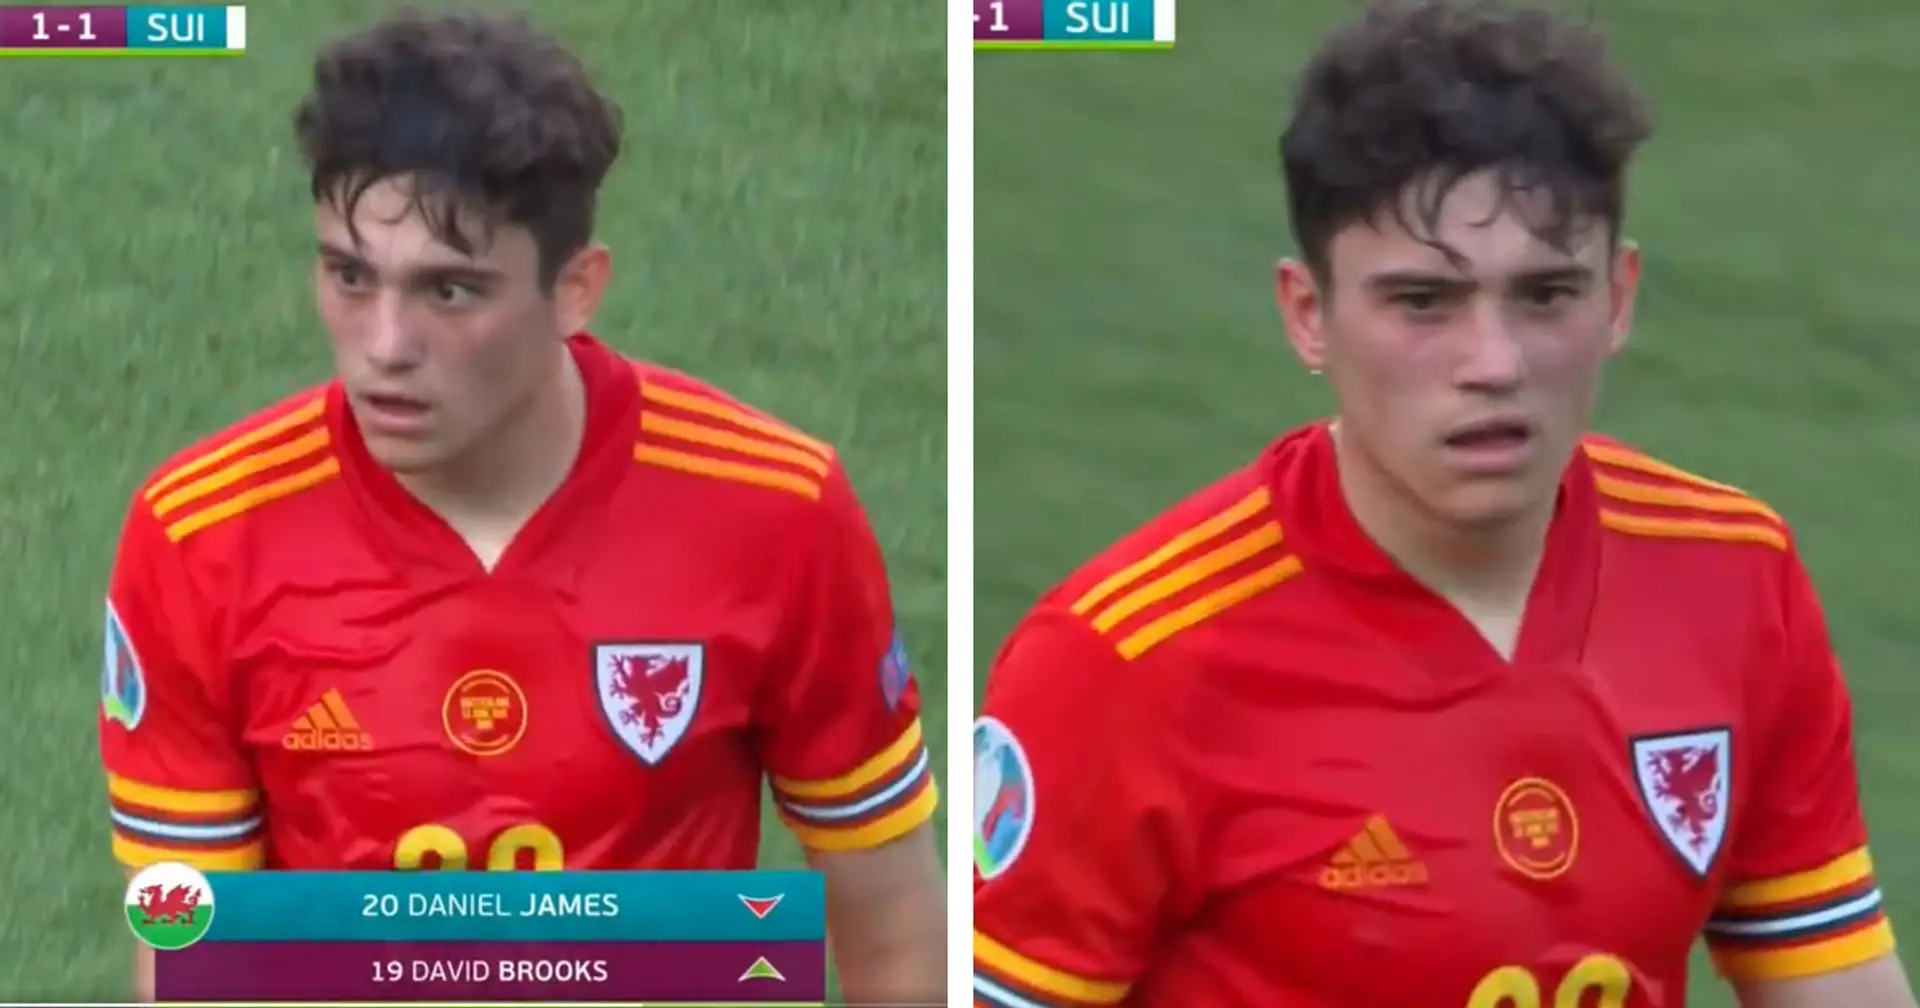 James infuriated with Wales coaching staff after being subbed vs Switzerland - and United fans love the fire in him